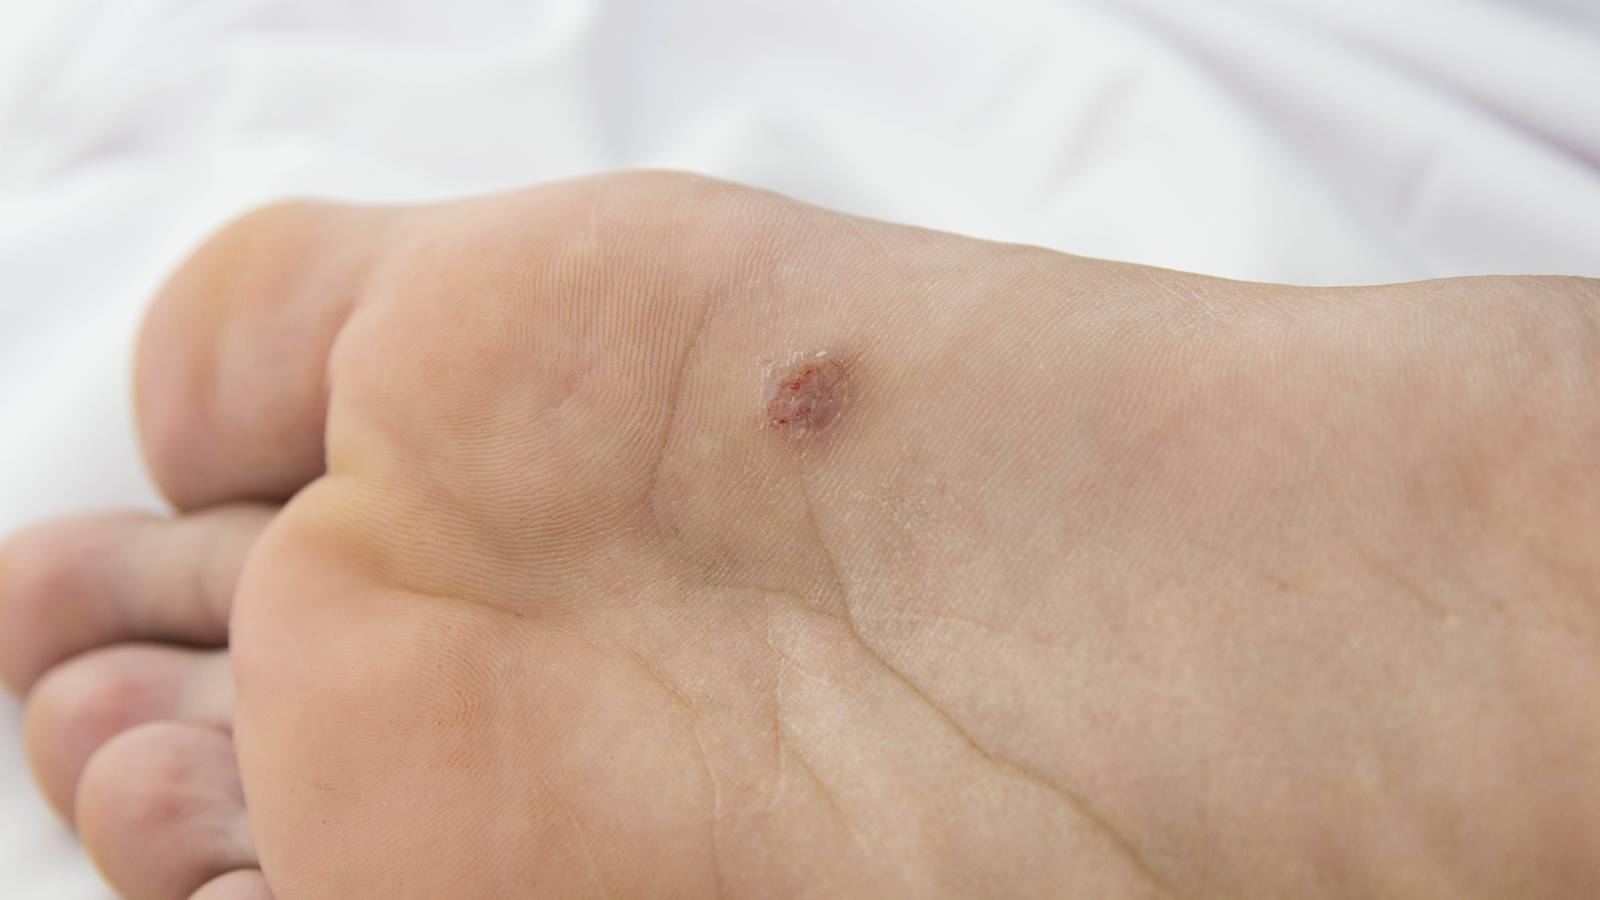 Do warts on foot itch, Hpv virus a kondom